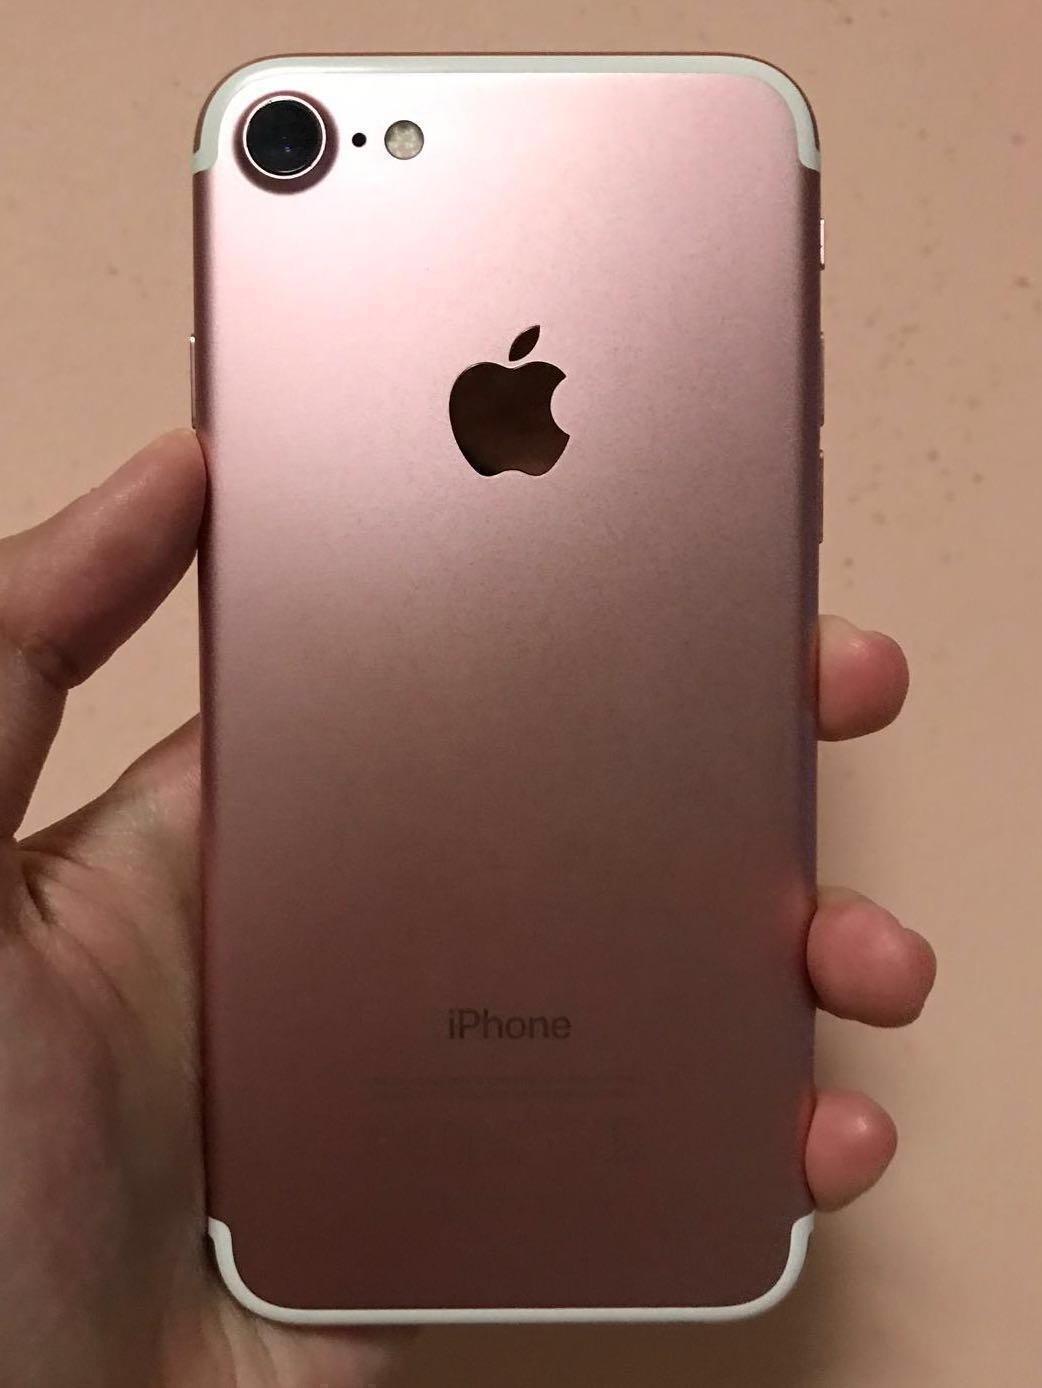 To Sell By This Week Iphone 7 Rose Gold 32gb Mobile Phones Tablets Iphone Iphone 7 Series On Carousell